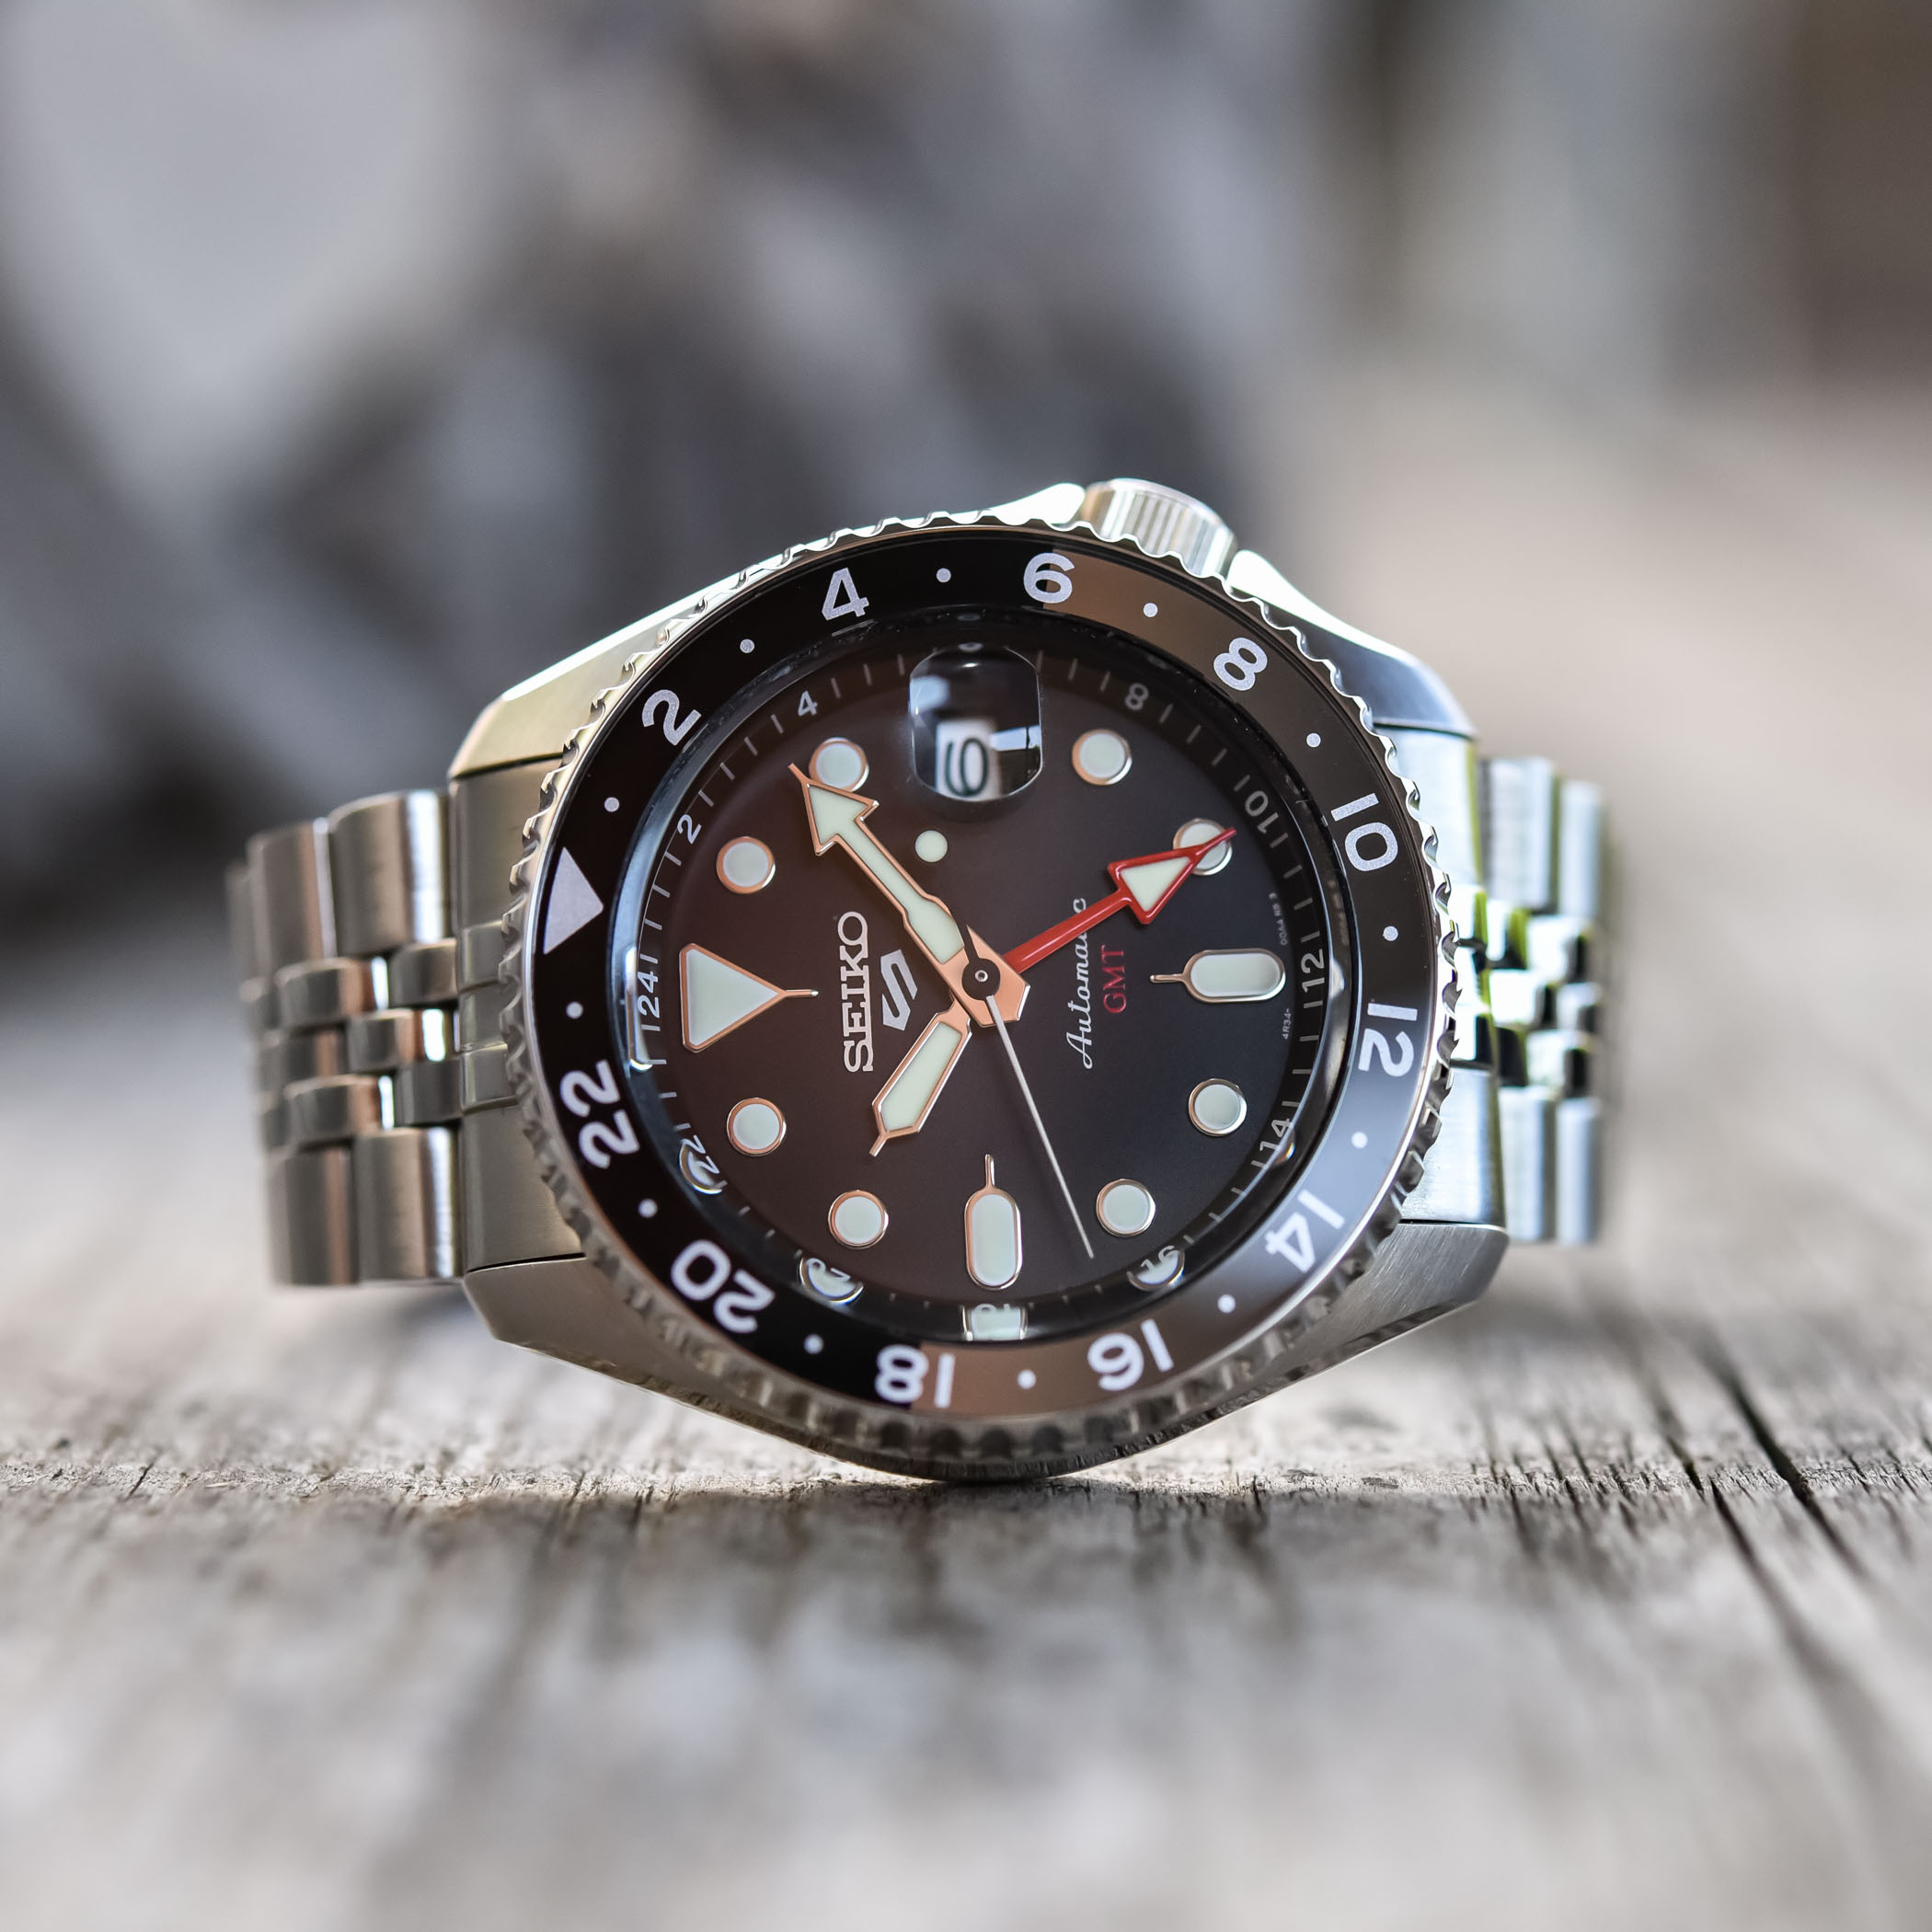 Seiko 5 Sports Style GMT Best Summer Watch - Opinion Review